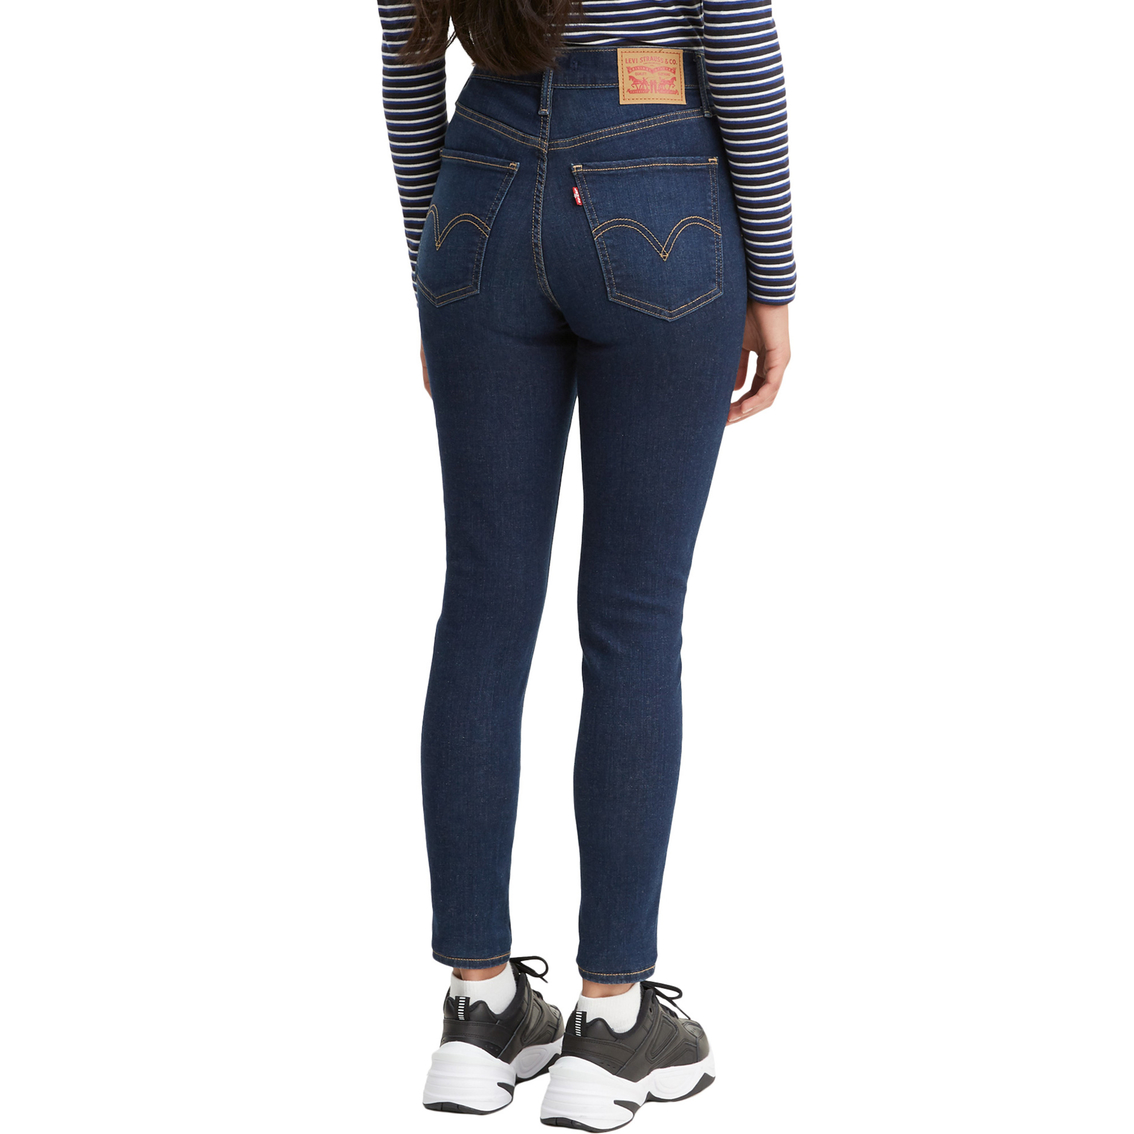 Levi's Mile High Super Skinny Jeans | Jeans | Clothing & Accessories ...